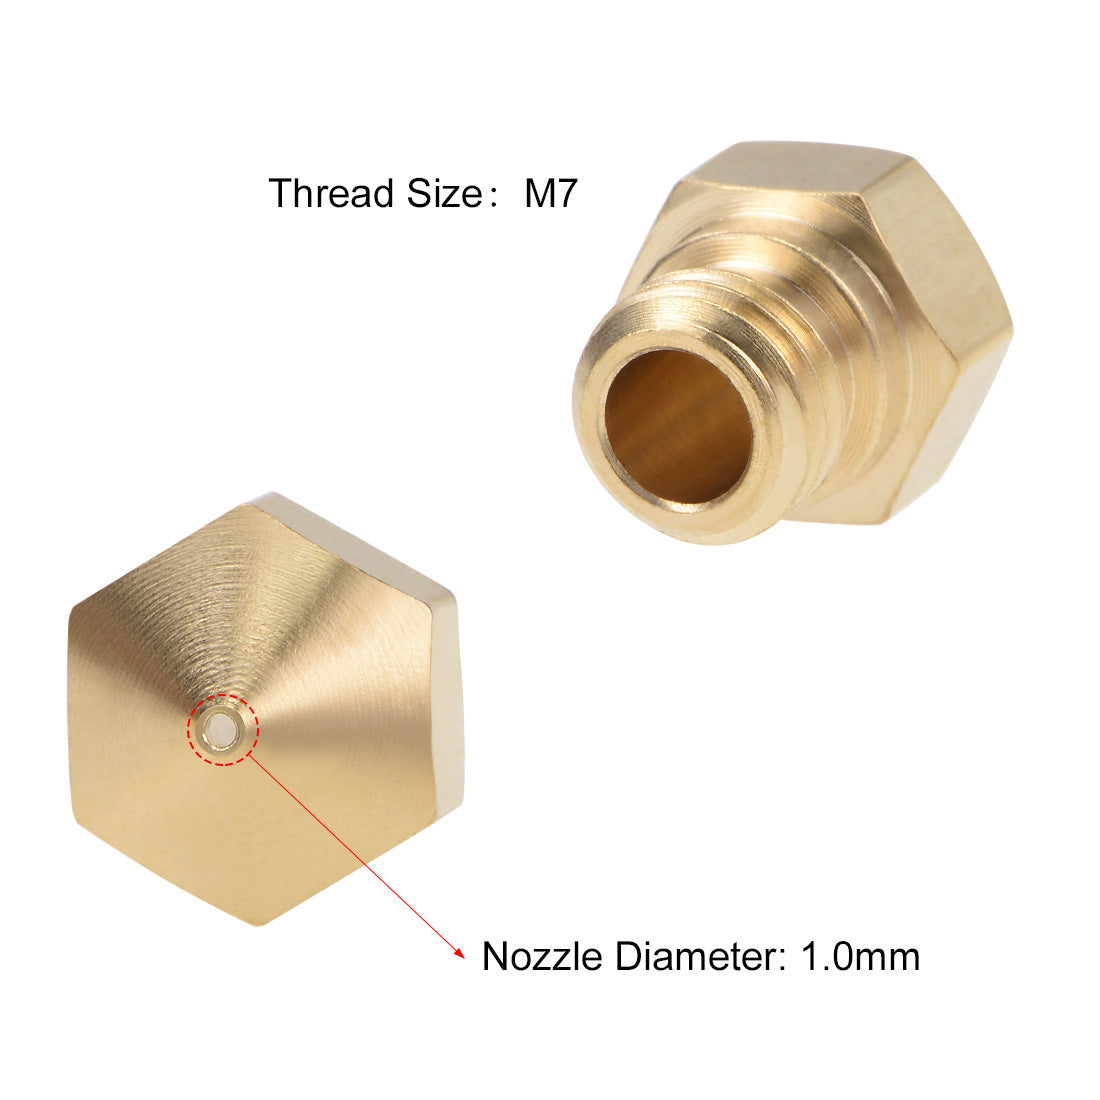 uxcell Uxcell 1mm 3D Printer Nozzle Head M7 Thread Replacement for MK10 1.75mm Extruder Print, Brass 5pcs